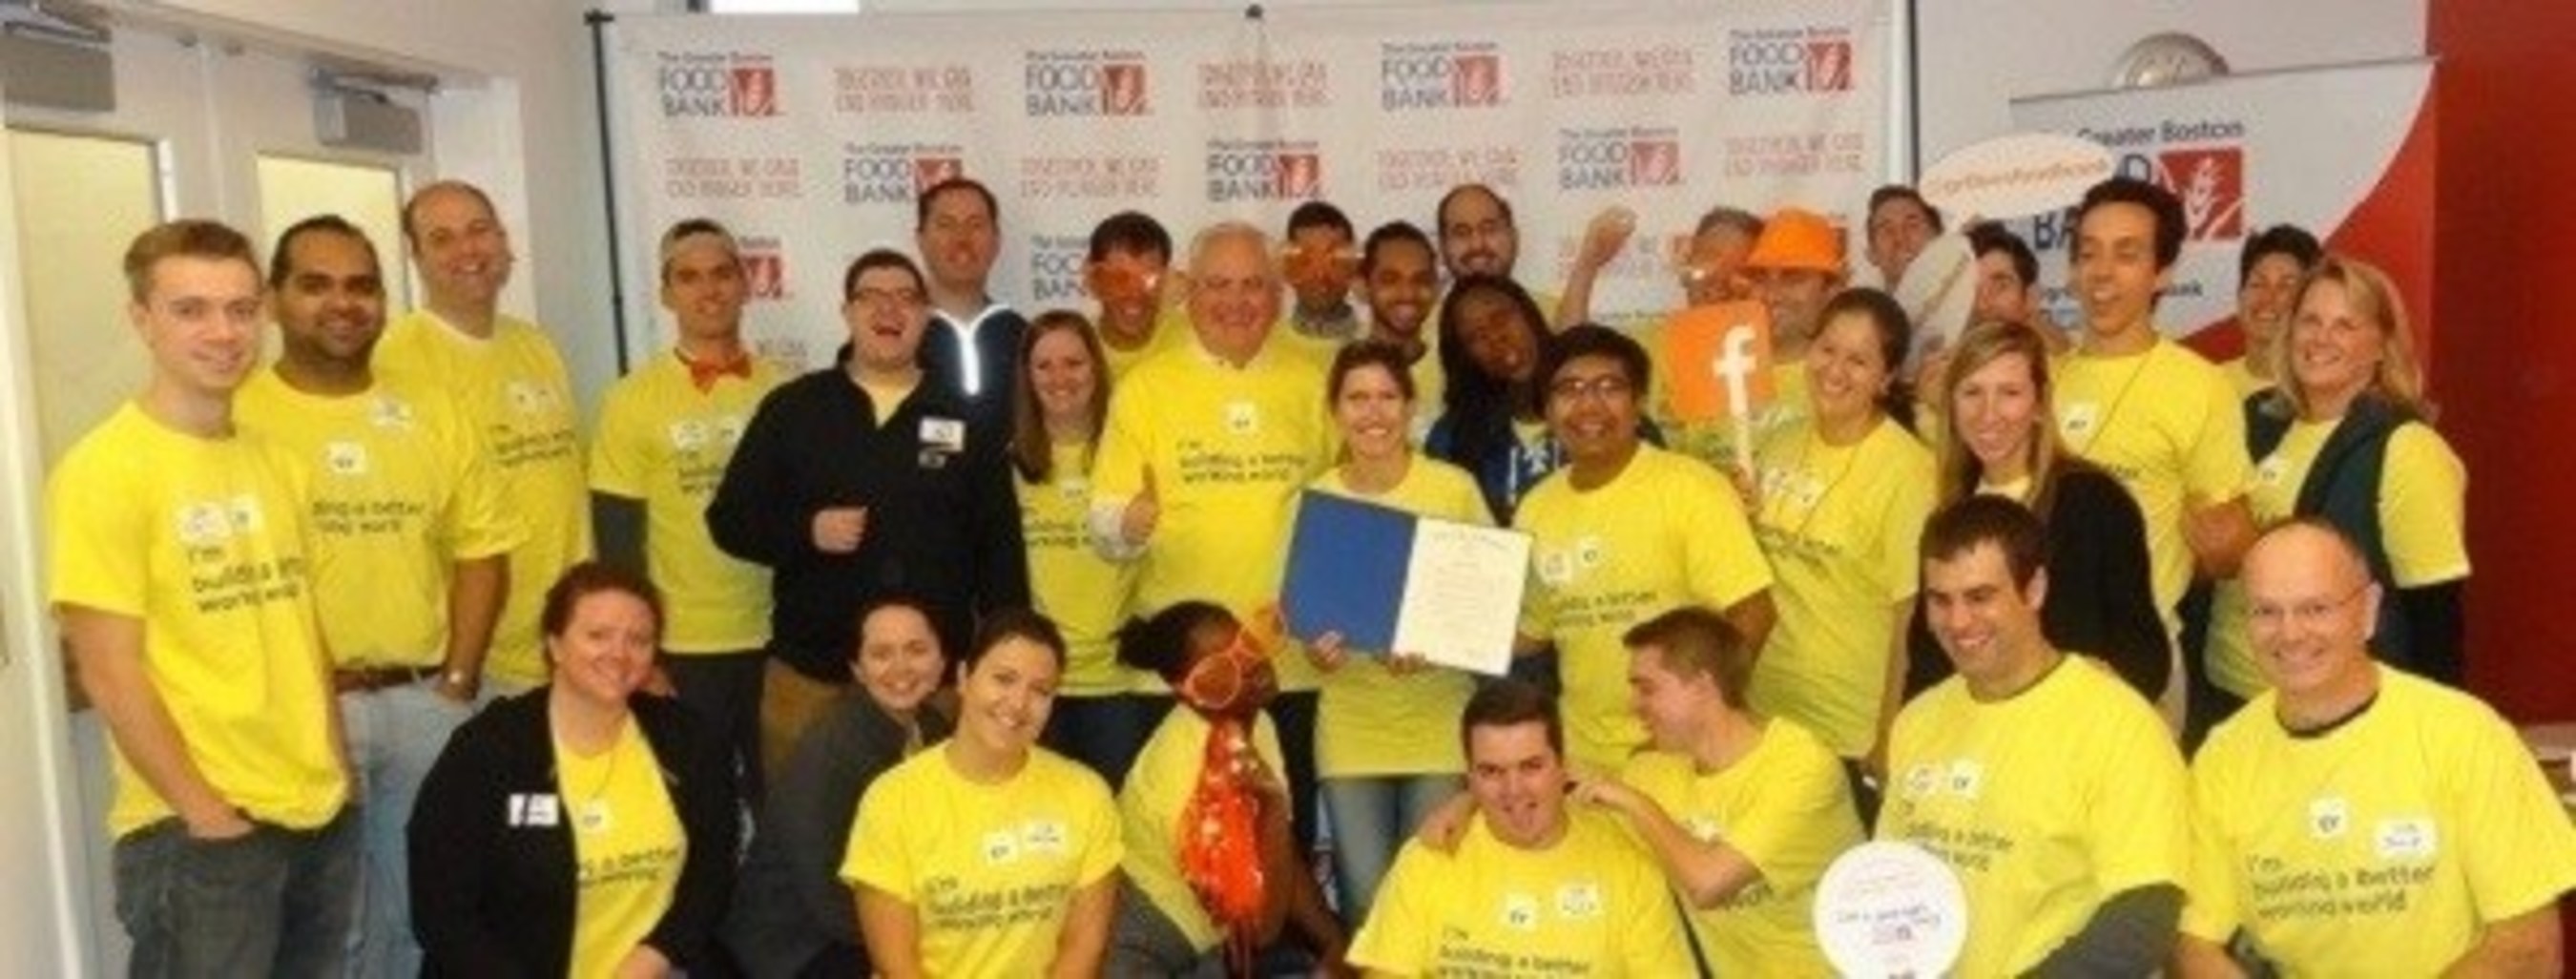 Boston Office Managing Partner George Neble volunteers with the EY team at the Boston Food Bank